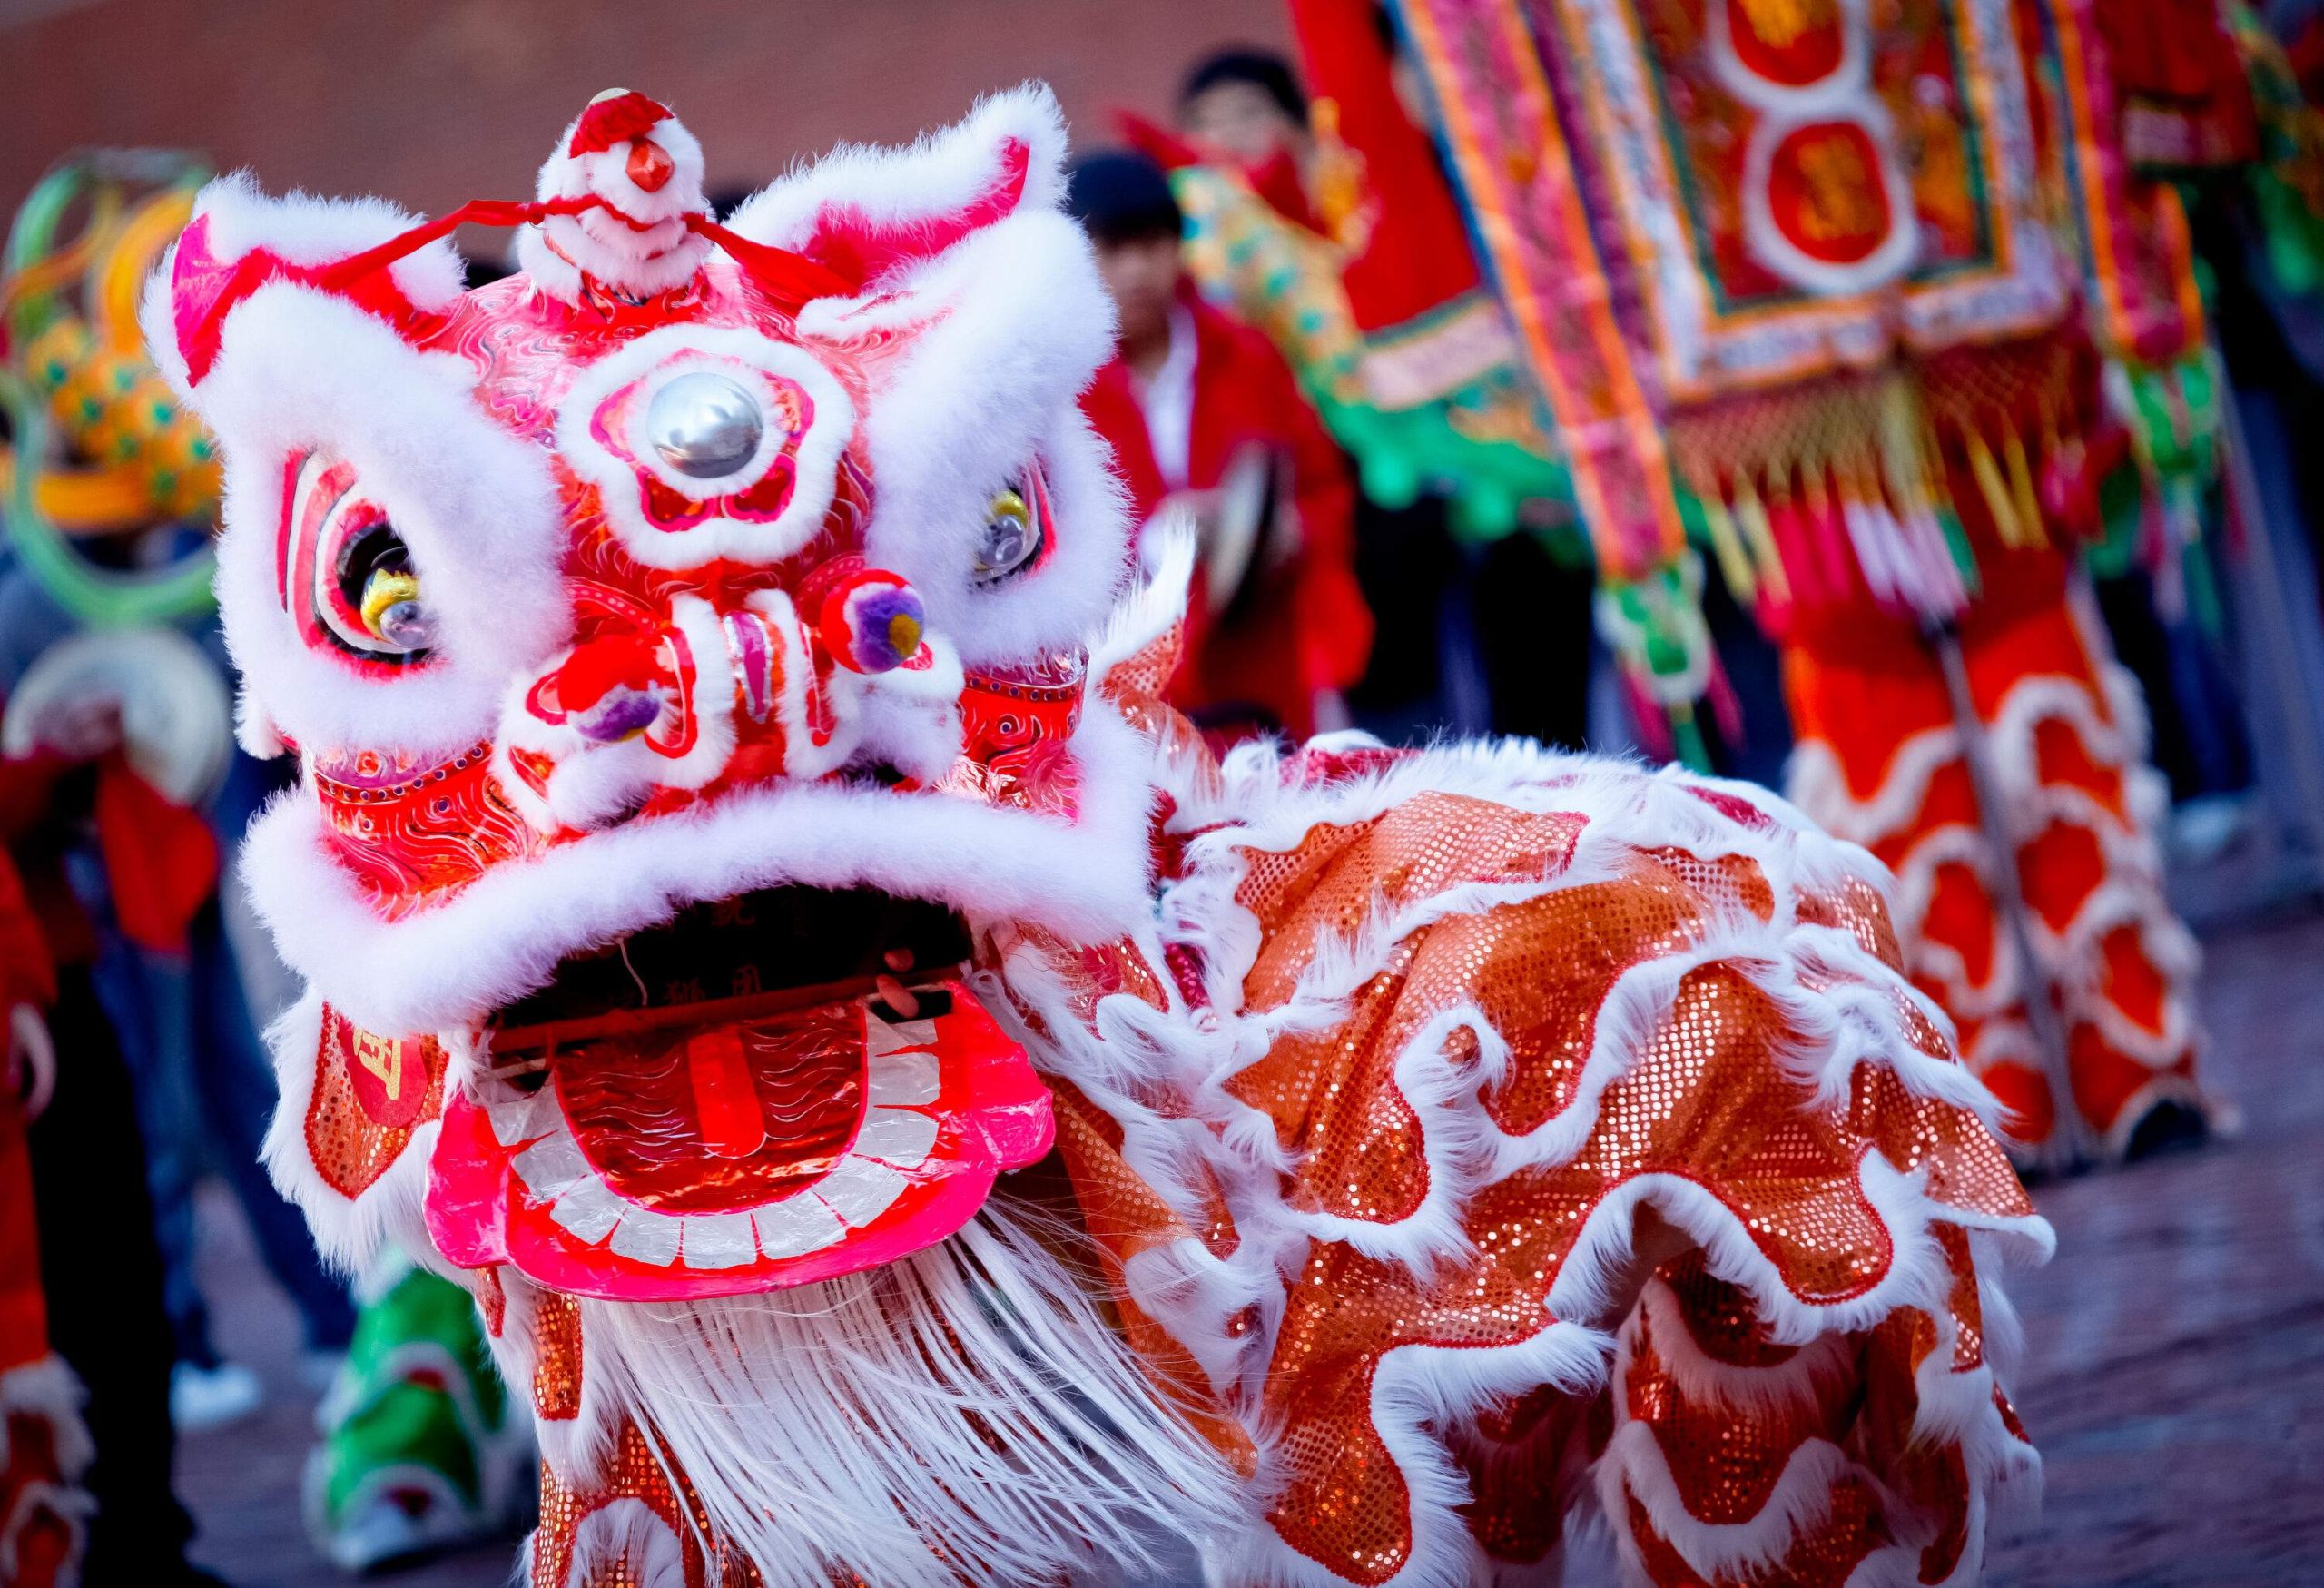 A traditional dragon dance performed in the square for the Chinese new year.